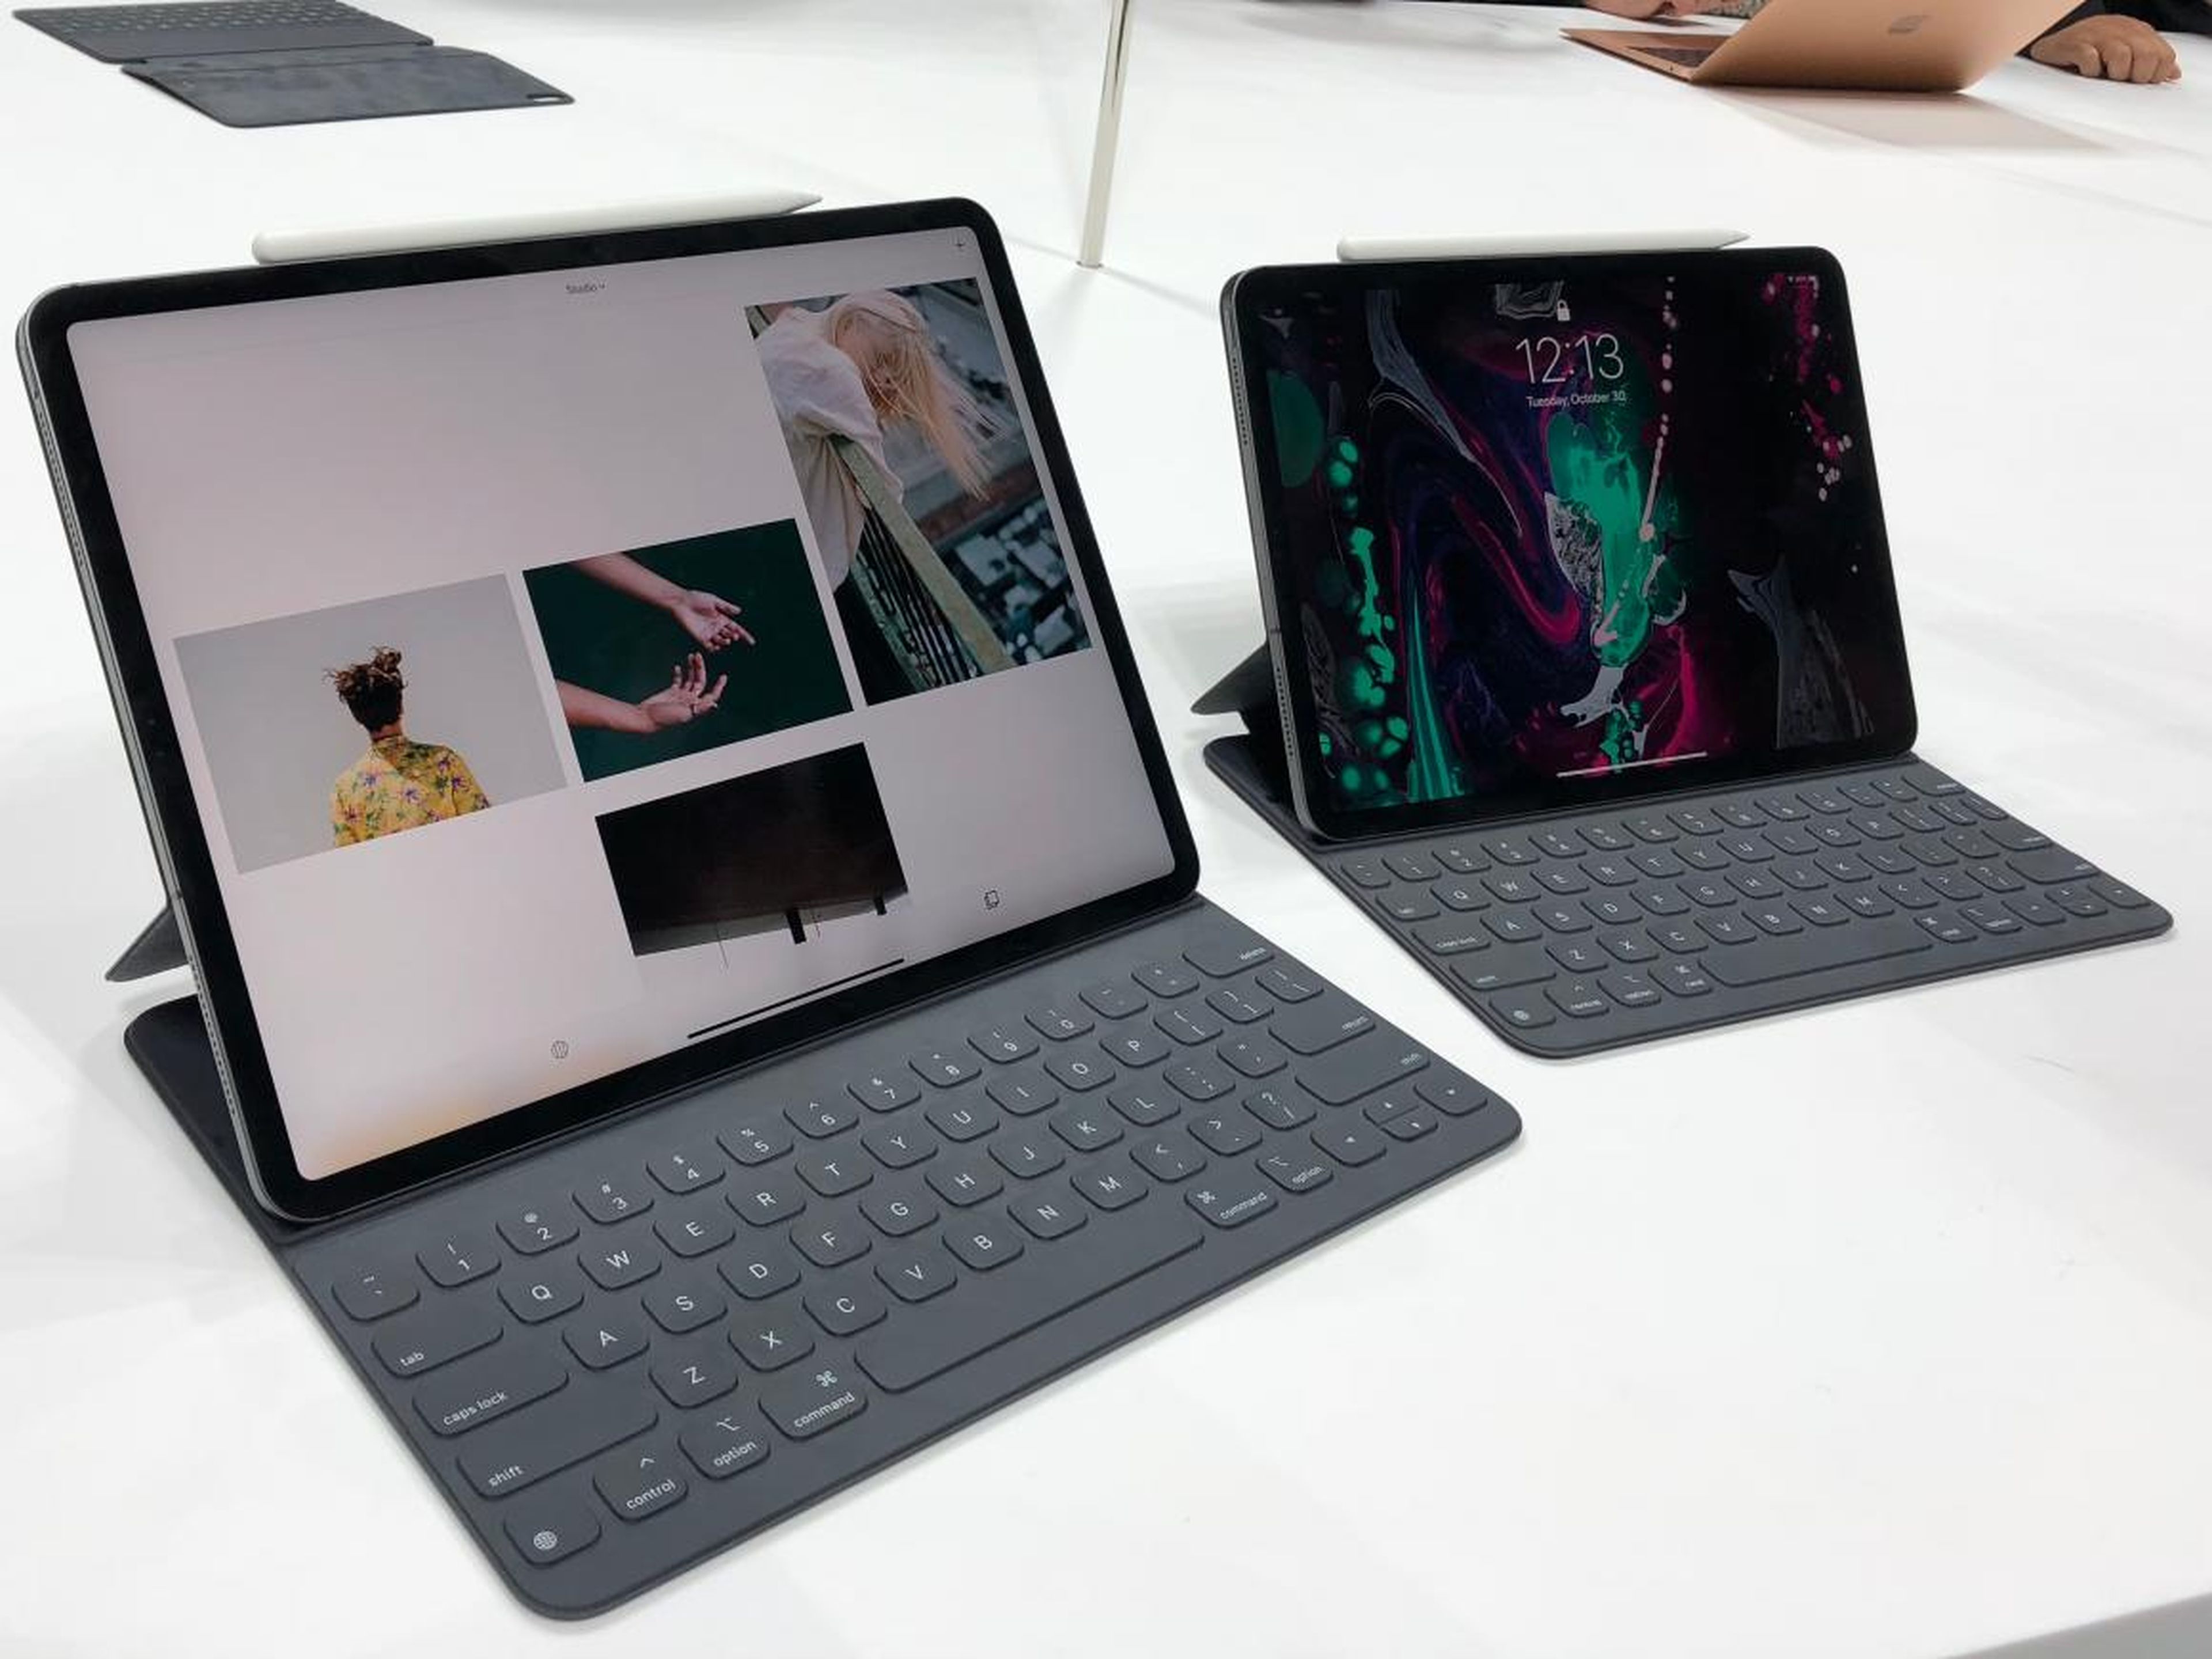 Face ID can unlock the iPad Pro even in landscape mode — which is good, because Apple's updated Smart Keyboard Folio situates the tablet that way.